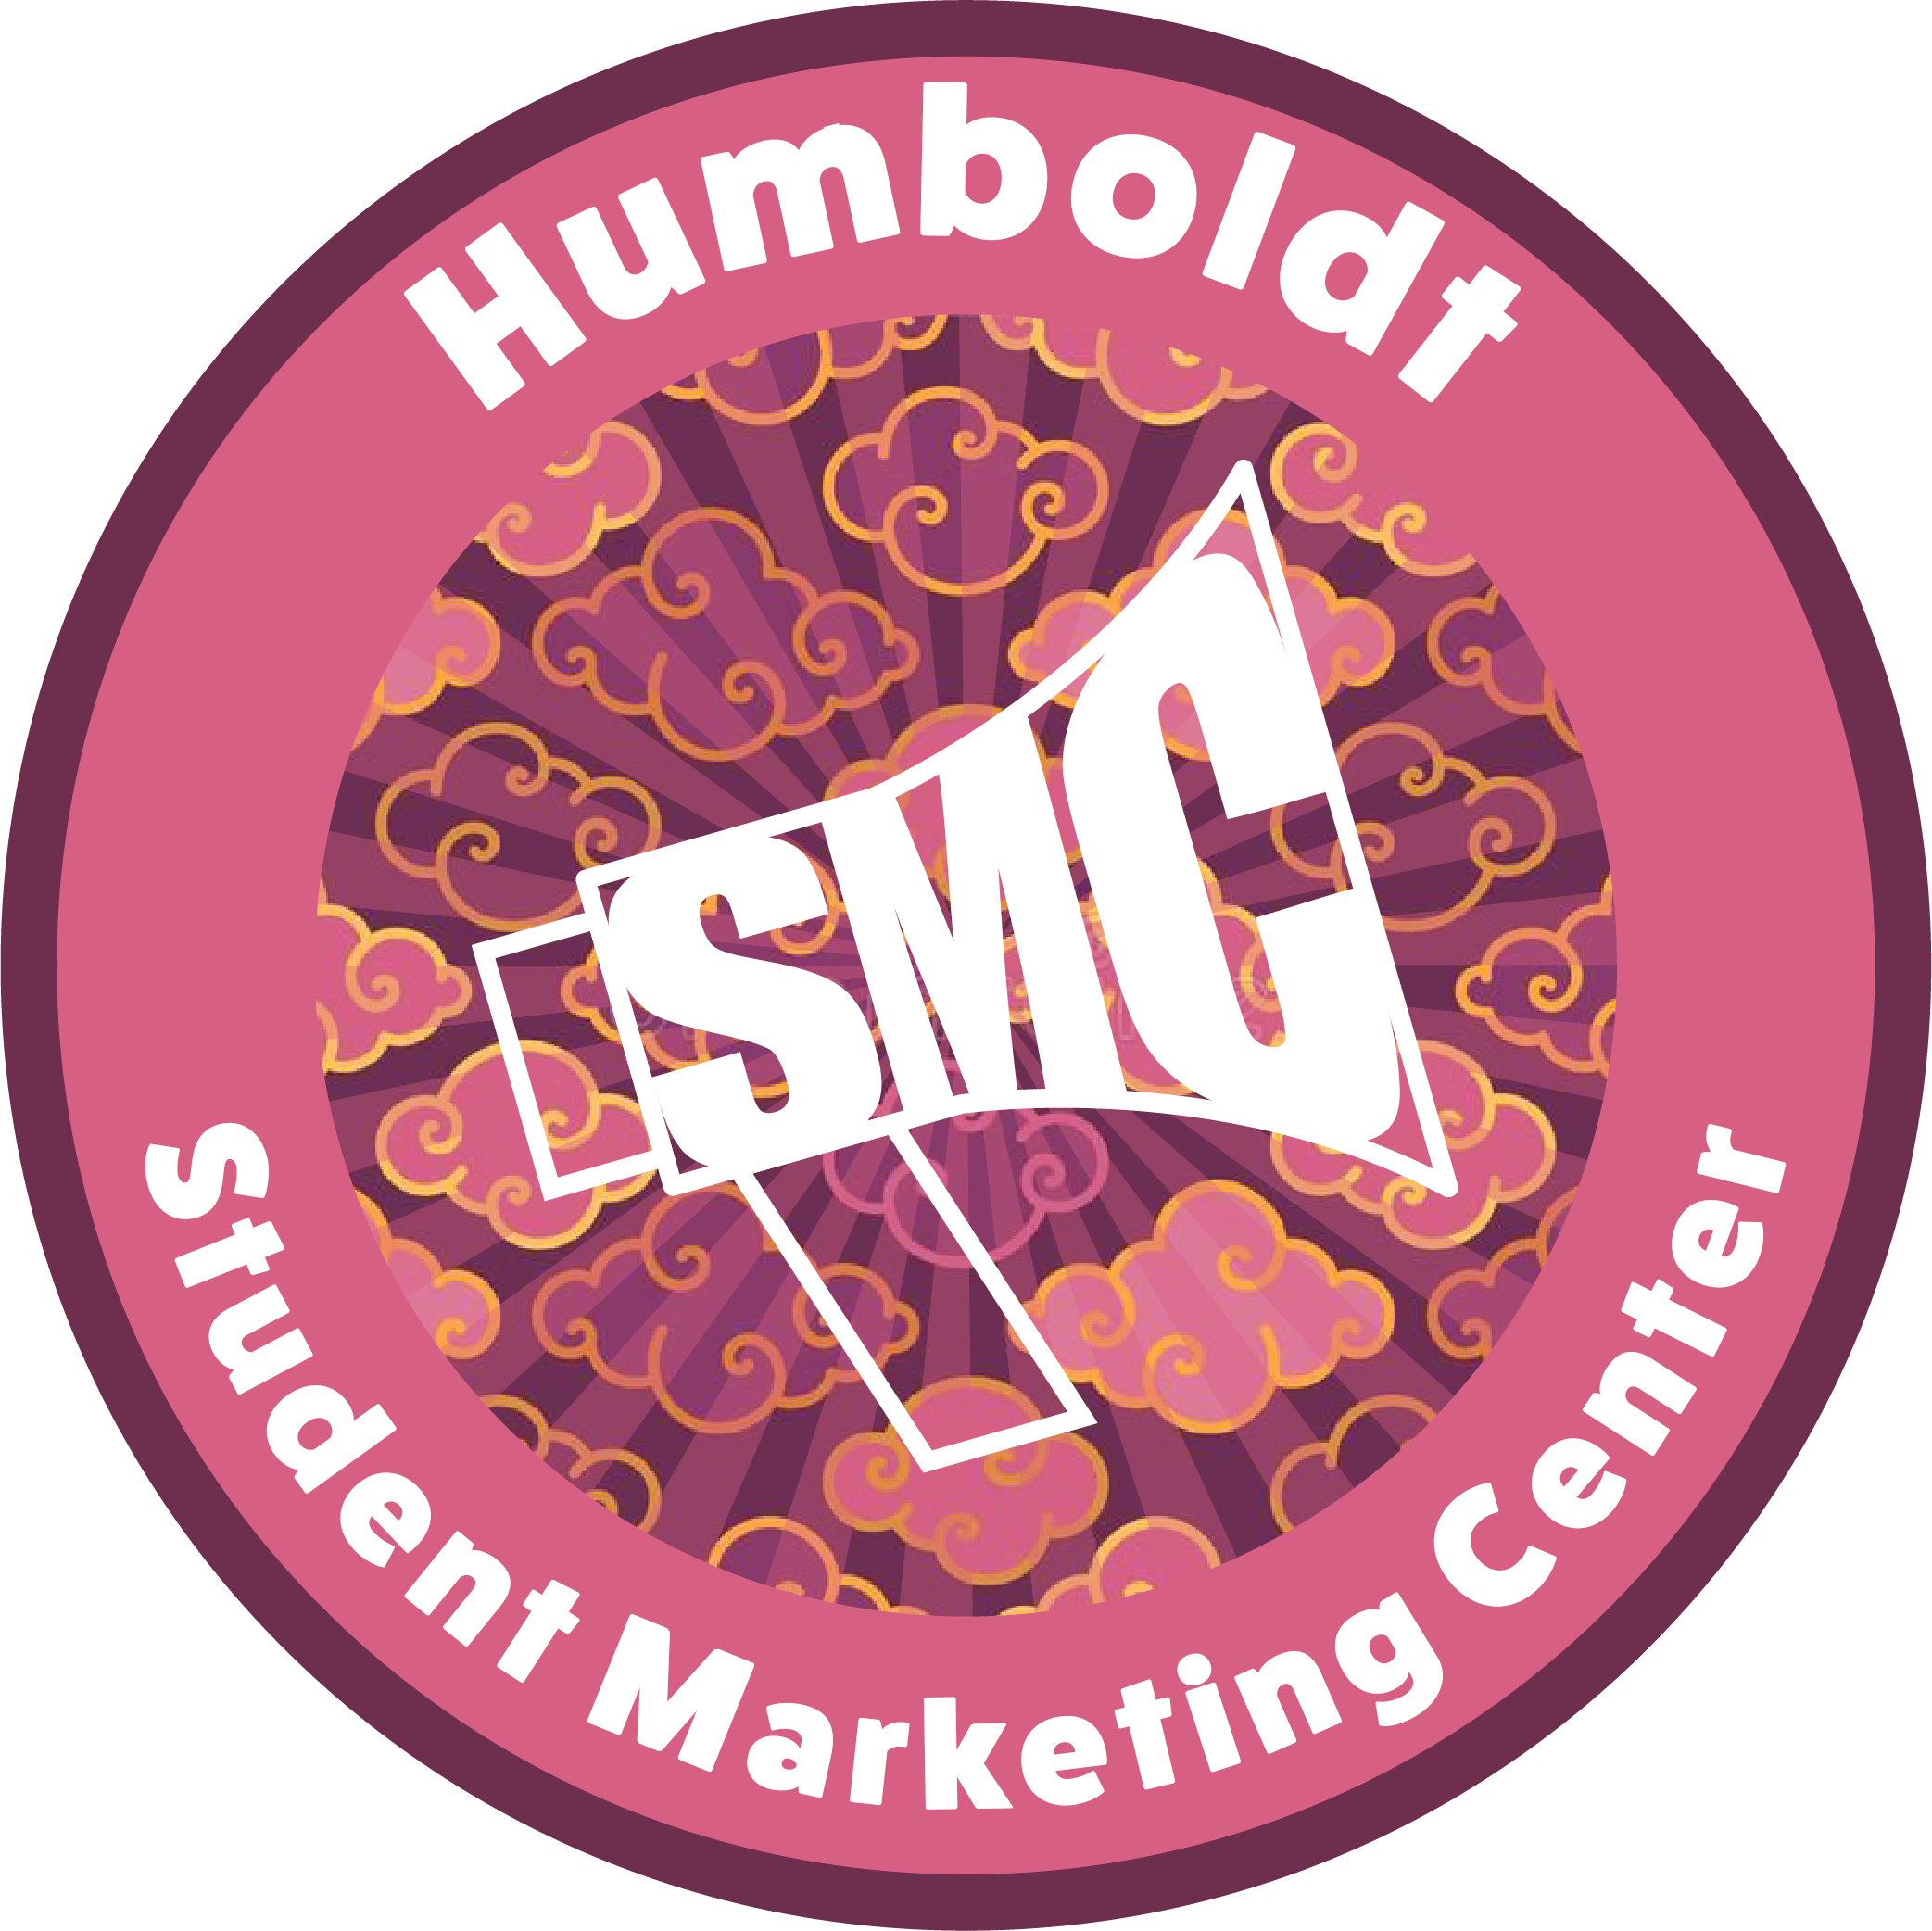 SMC Student Marketing Center Asian Pacific Islander Month logo in dusty pink with swirls.